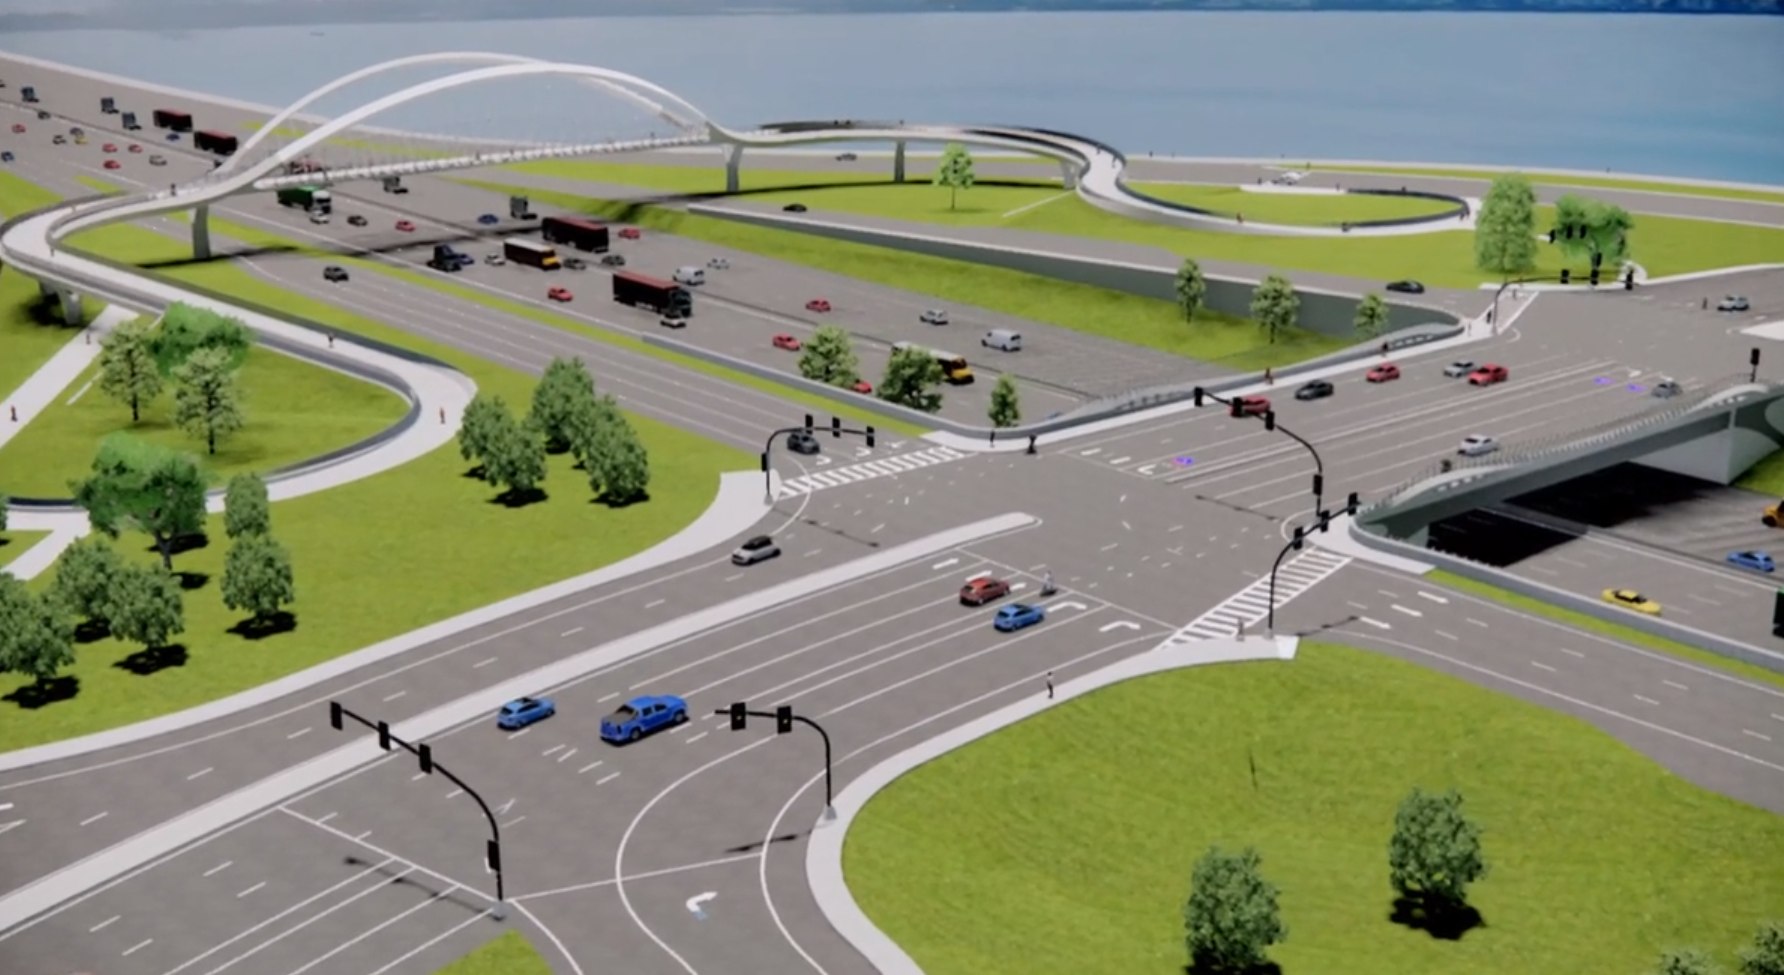 A rendering of the new I-80, Ashby interchange which Caltrans and ACTC want to significantly widen under the guise of "complete streets." Image: ACTC